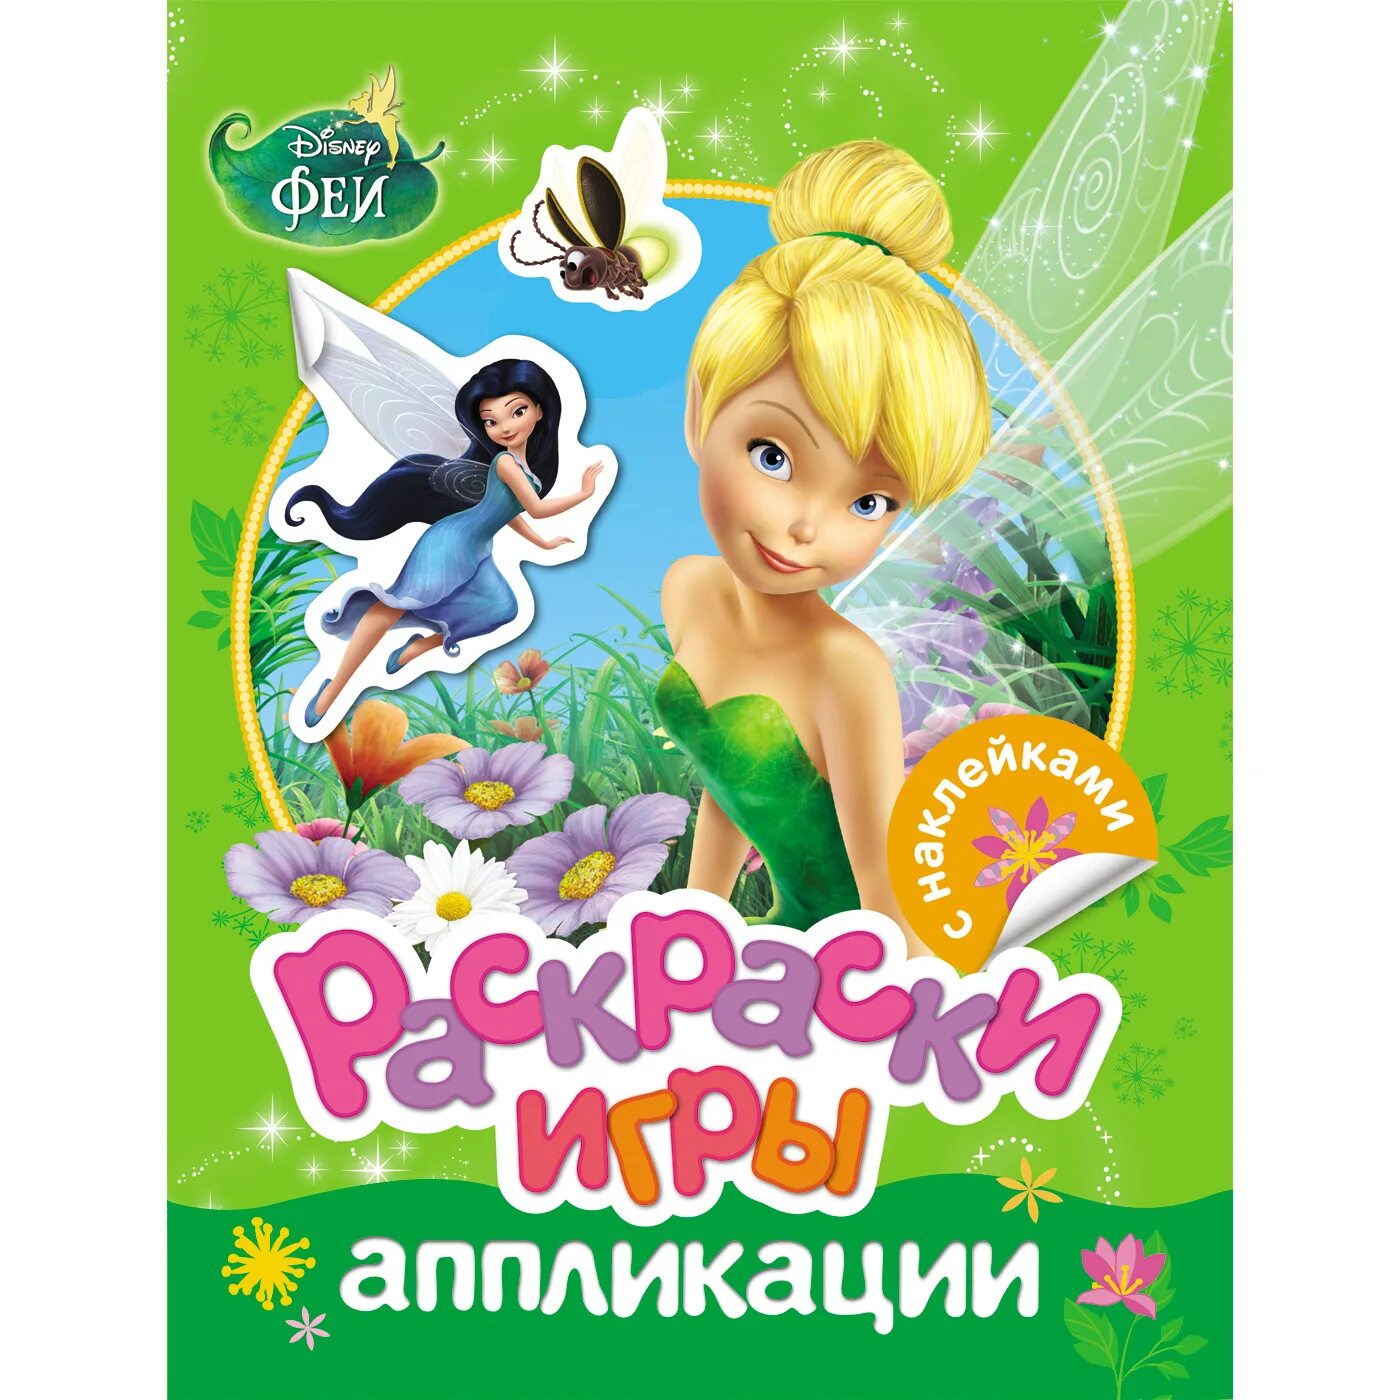 Disney fairies with stickers #9